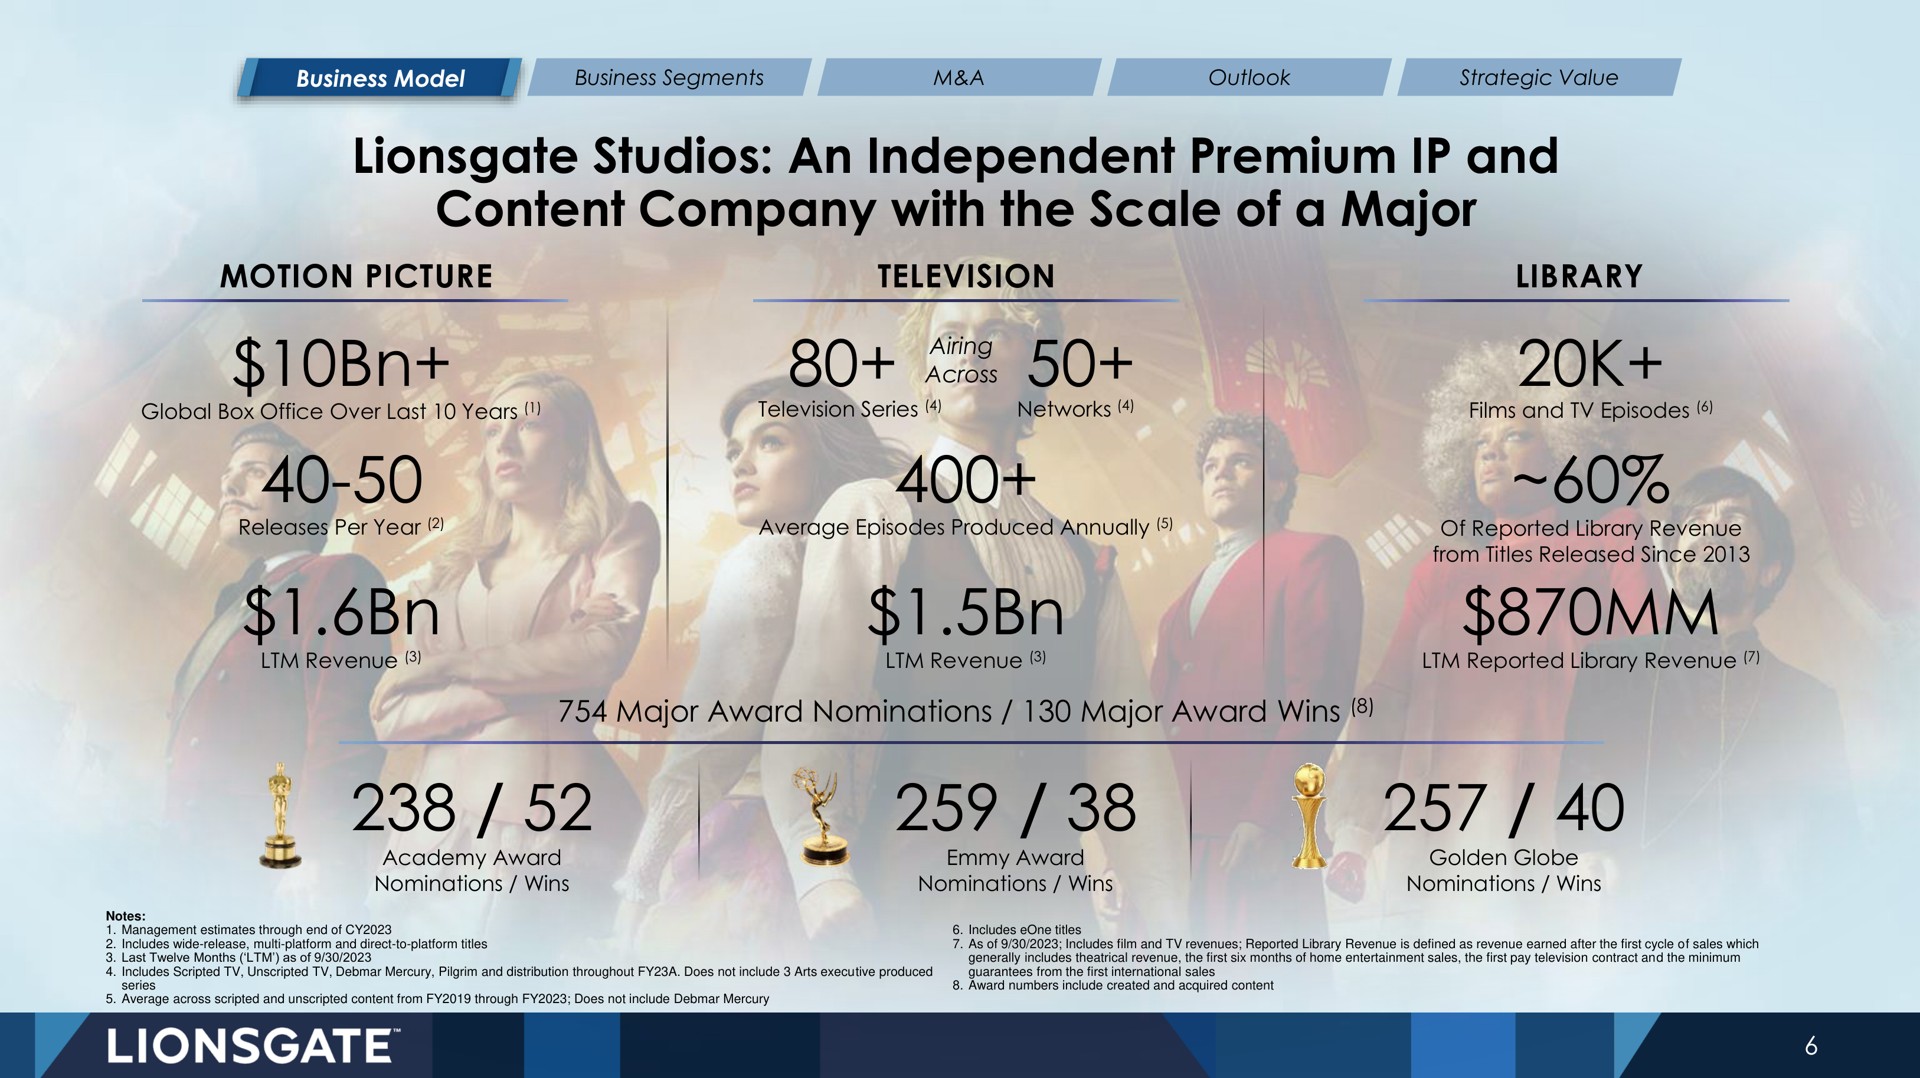 studios an independent premium and content company with the scale of a major | Lionsgate